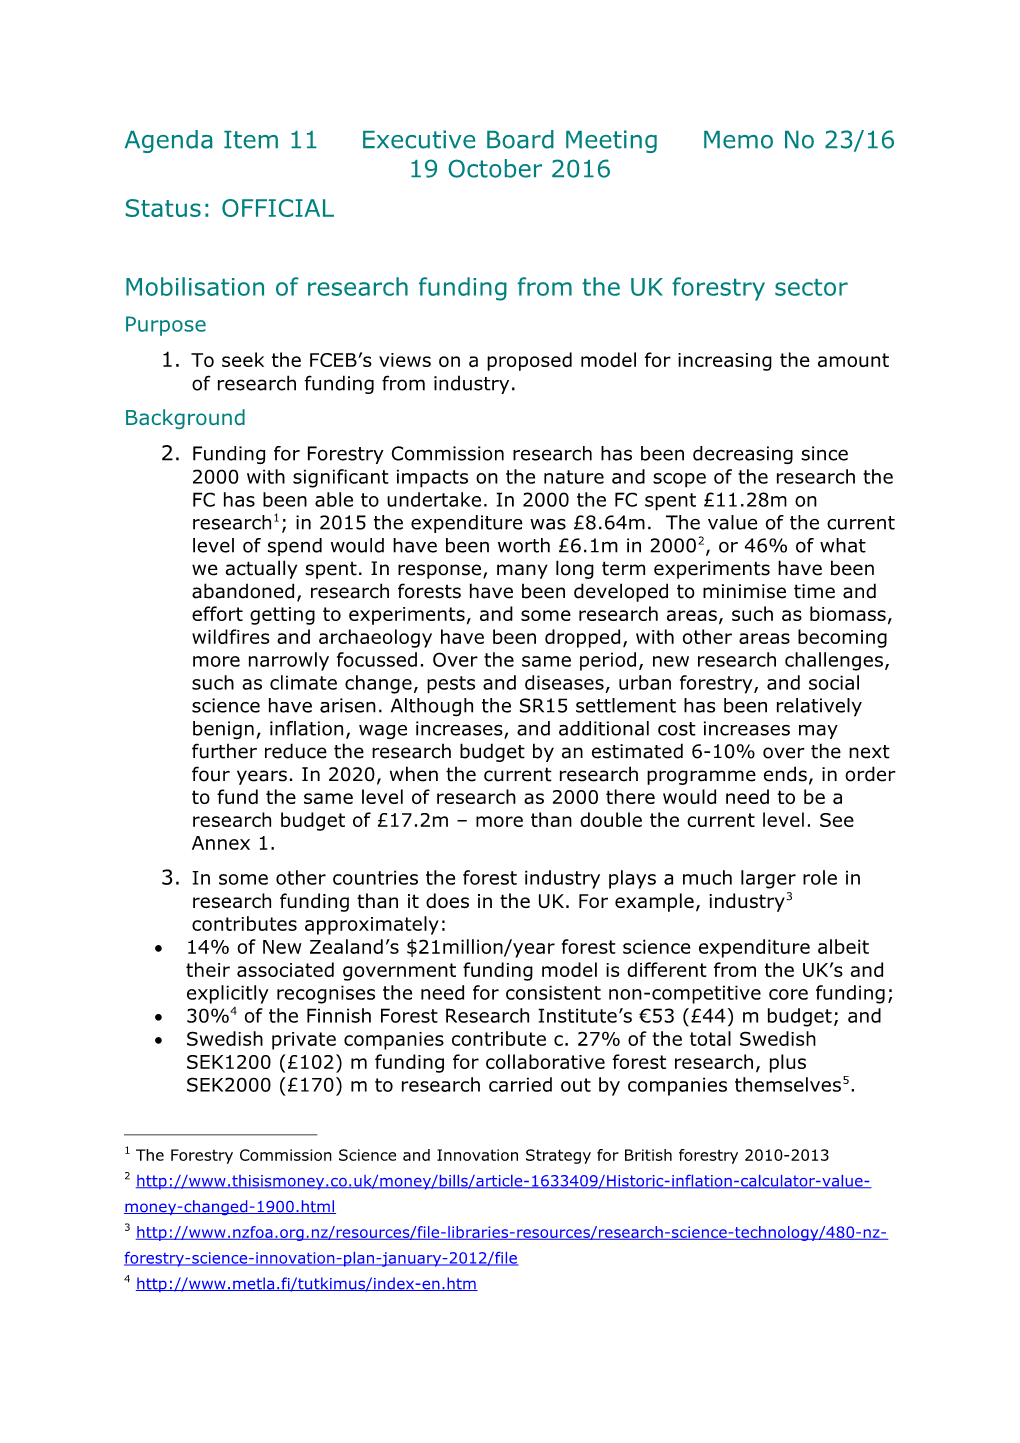 Mobilisation of Research Funding from the UK Forestry Sector